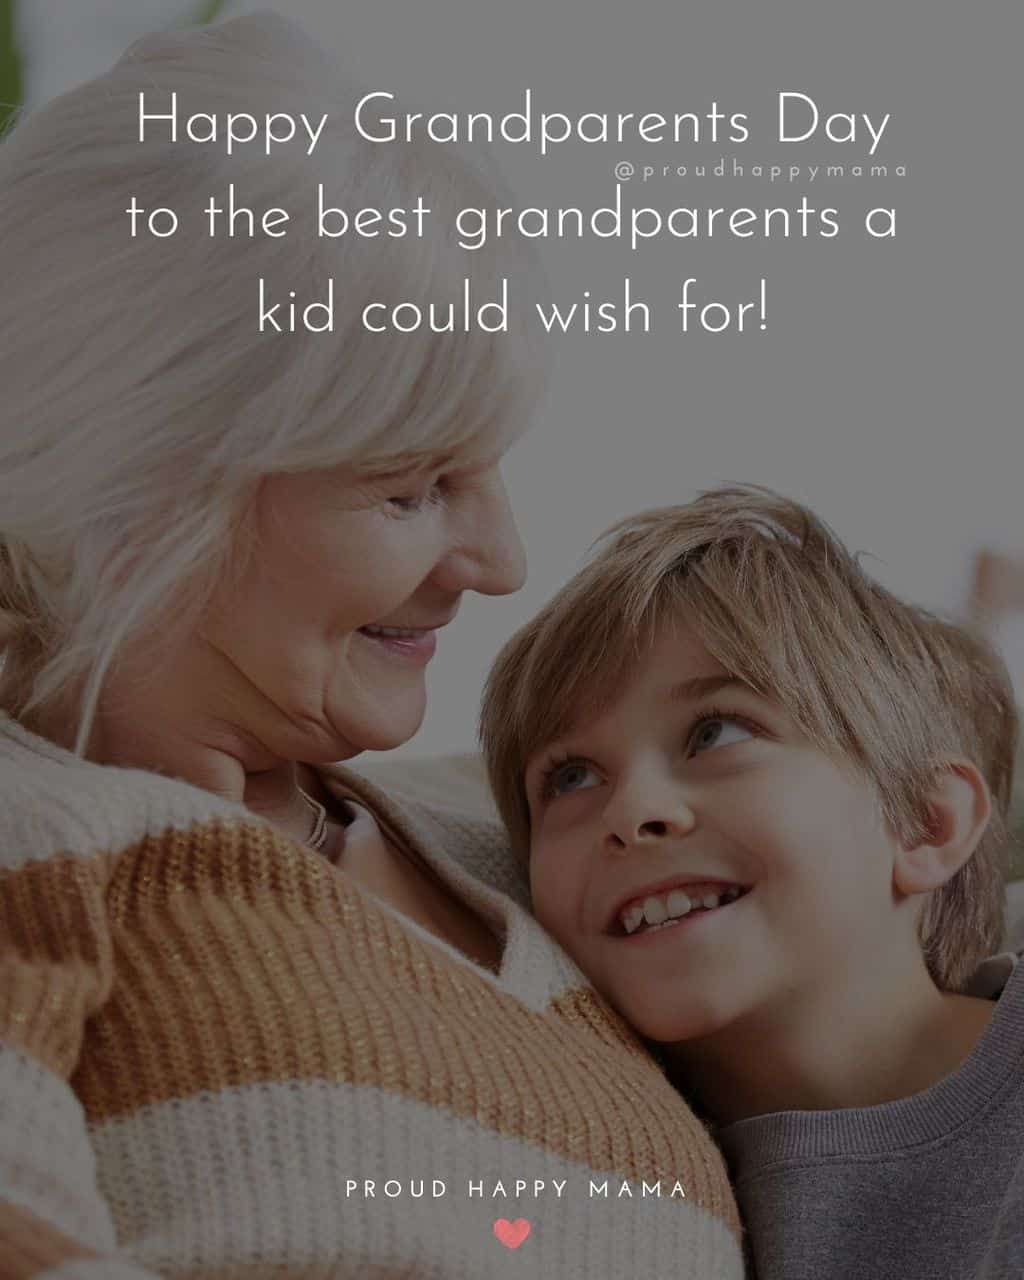 50 Happy Grandparents Day Quotes And Wishes (With Images)